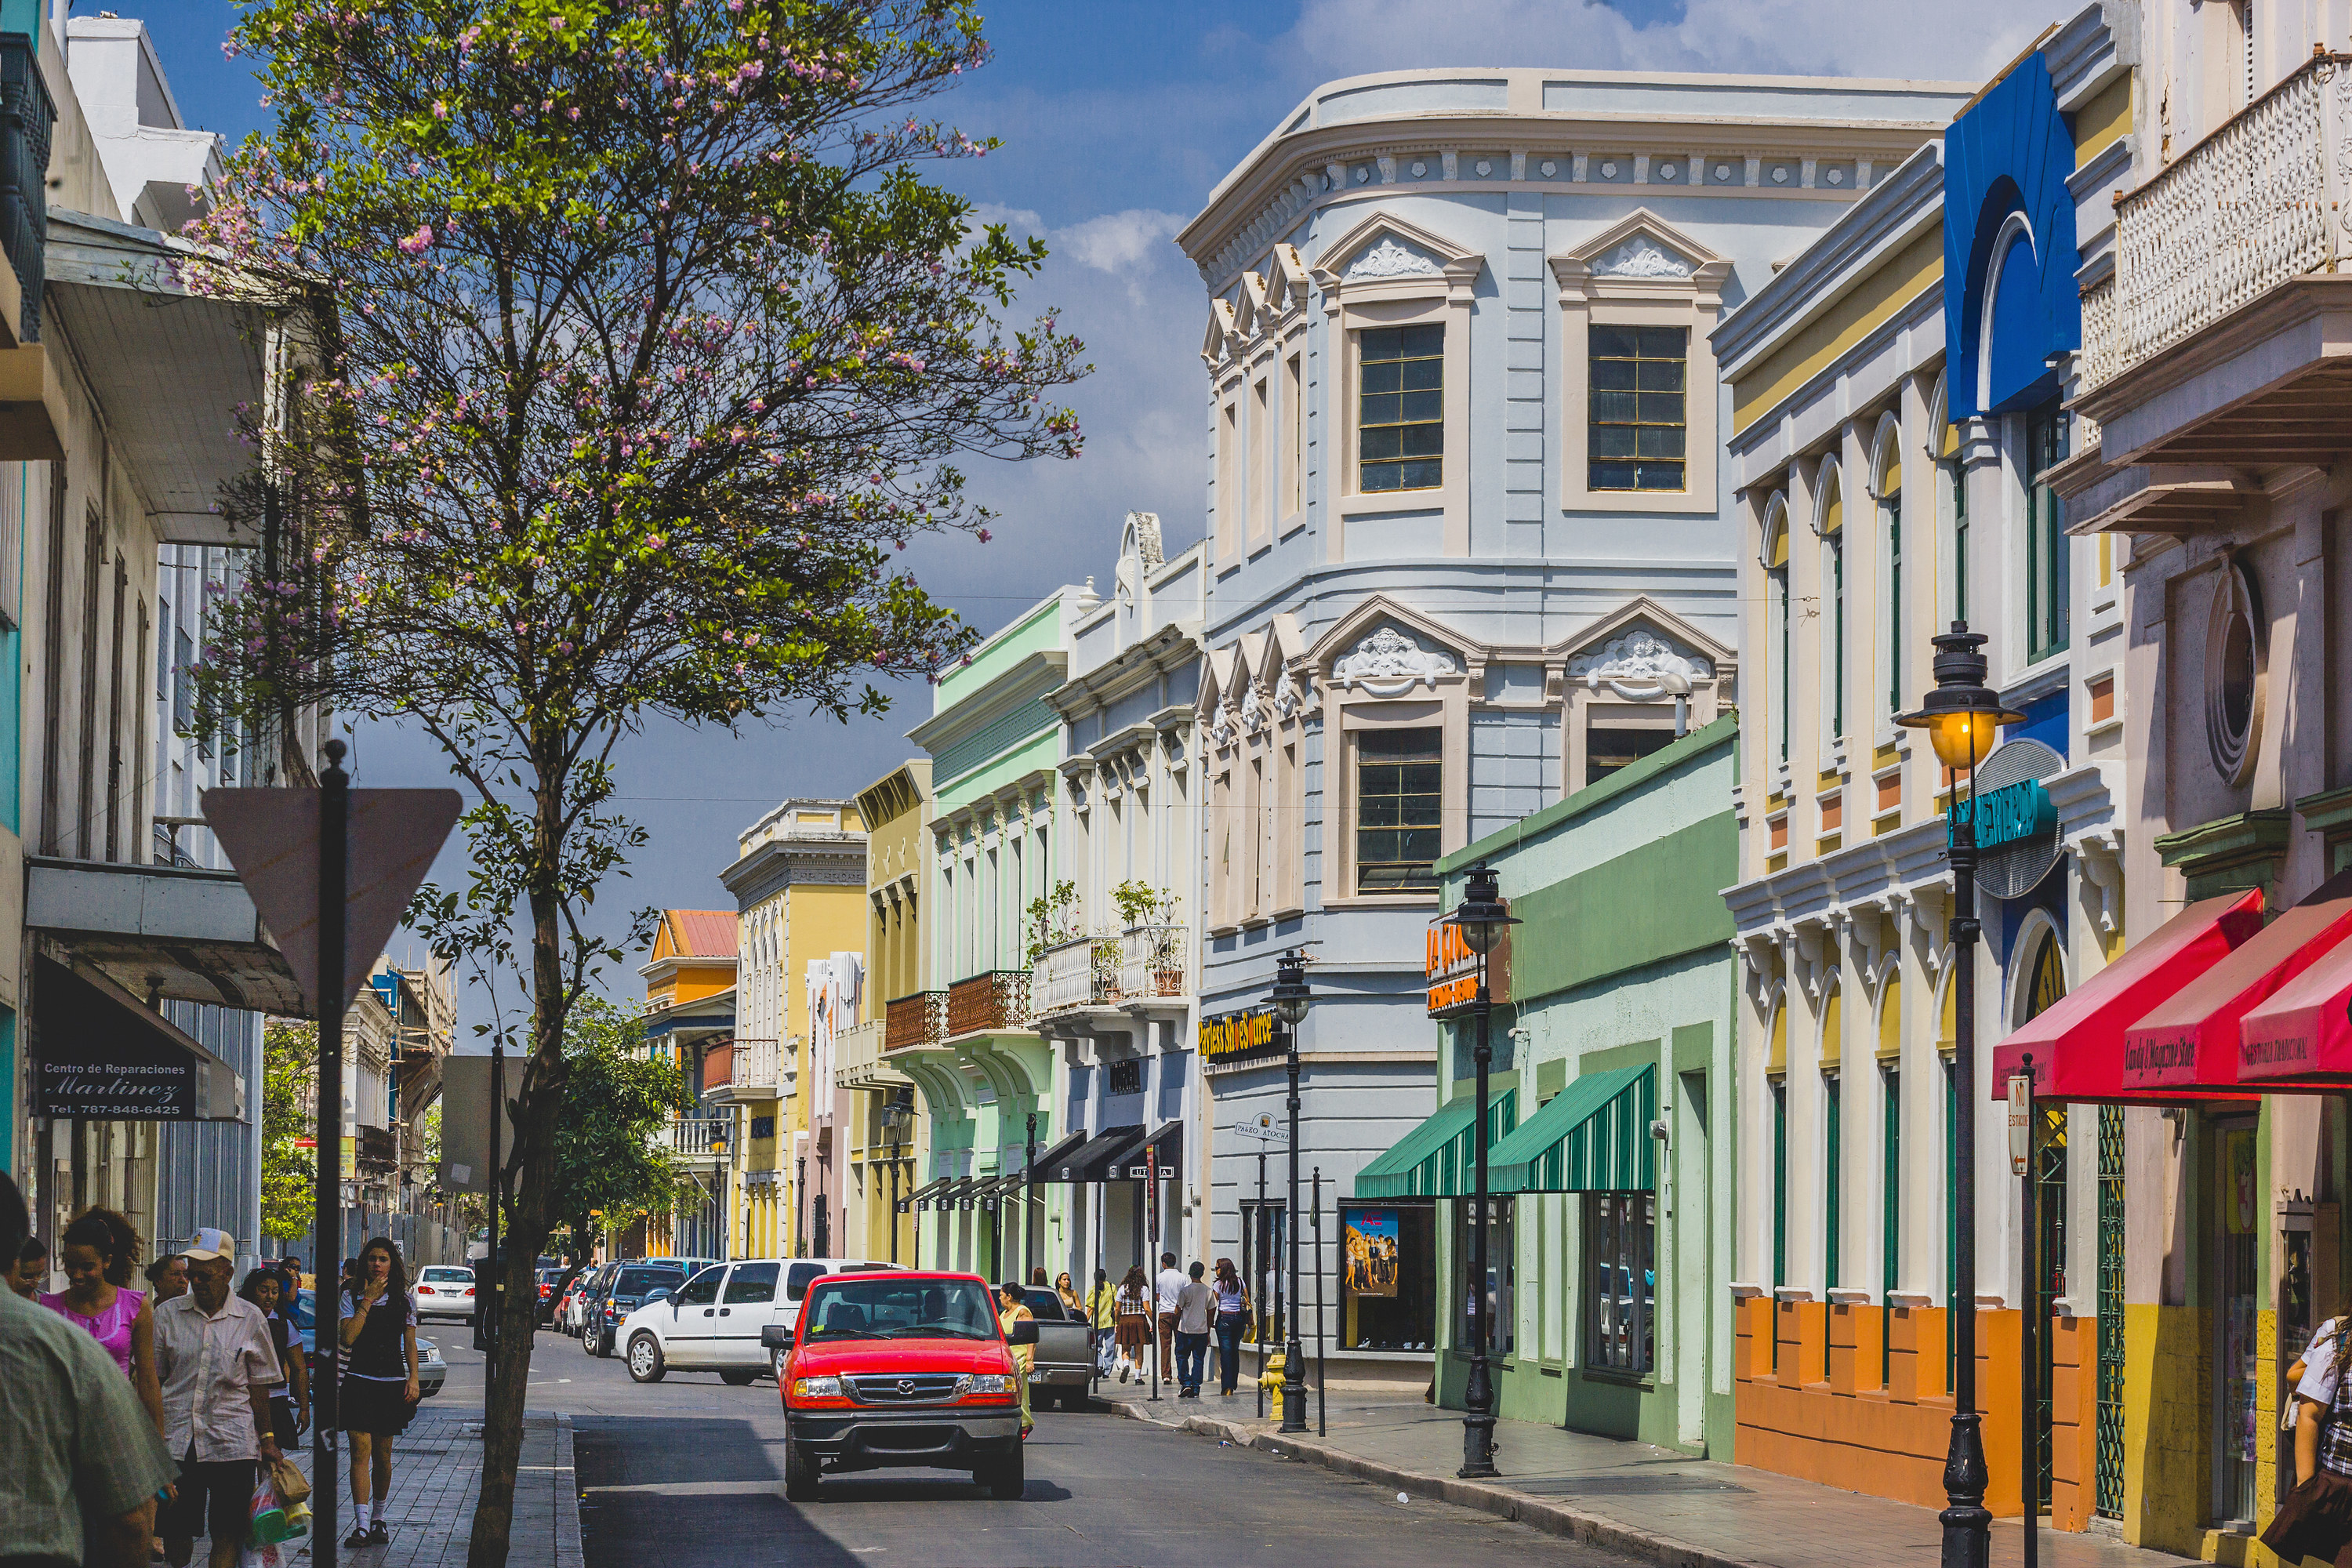 Street scene of a town in Puerto Rico